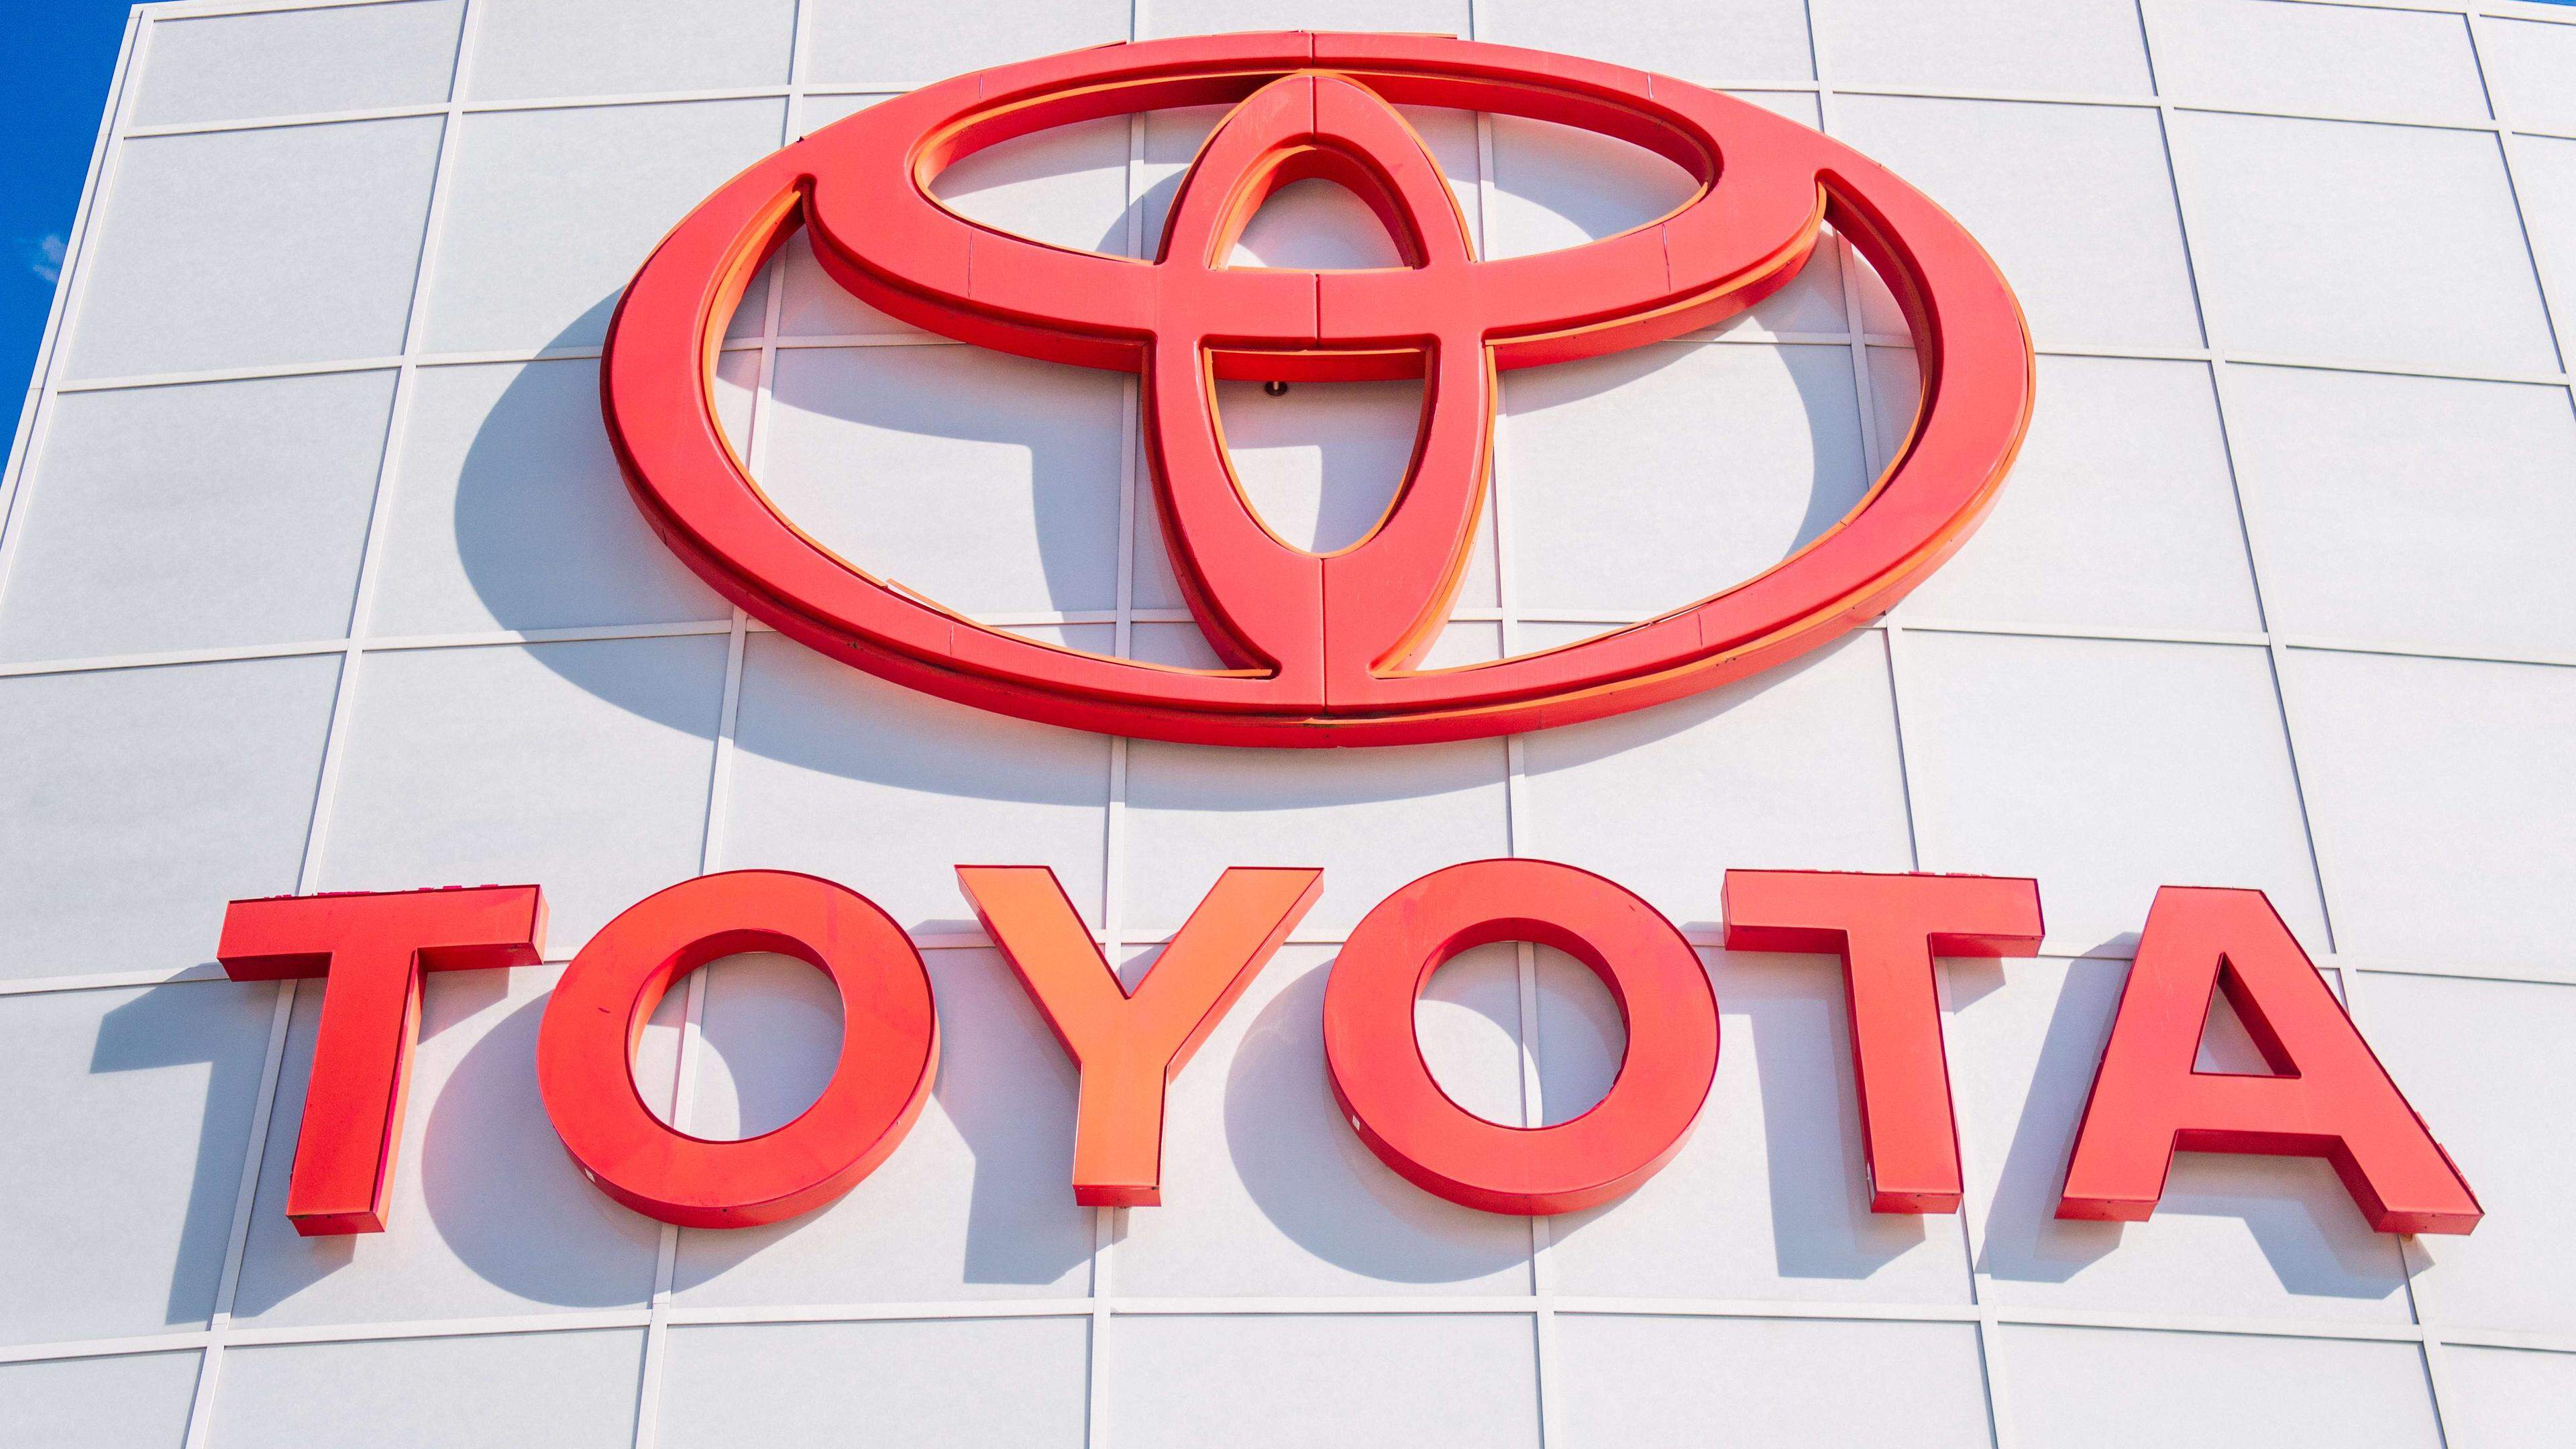 HOUSTON, TEXAS - JANUARY 04: A Toyota sign is displayed at a dealership on January 04, 2022 in Houston, Texas. Toyota Motor Corp has been ranked the No. 1 automaker in America after surpassing General Motors in auto sales for the first time since 1931. Automakers reported Toyota having sold 2.332 million vehicles in the United States, in 2021, compared to 2.218 million for General Motors.   Brandon Bell/Getty Images/AFP
== FOR NEWSPAPERS, INTERNET, TELCOS & TELEVISION USE ONLY ==